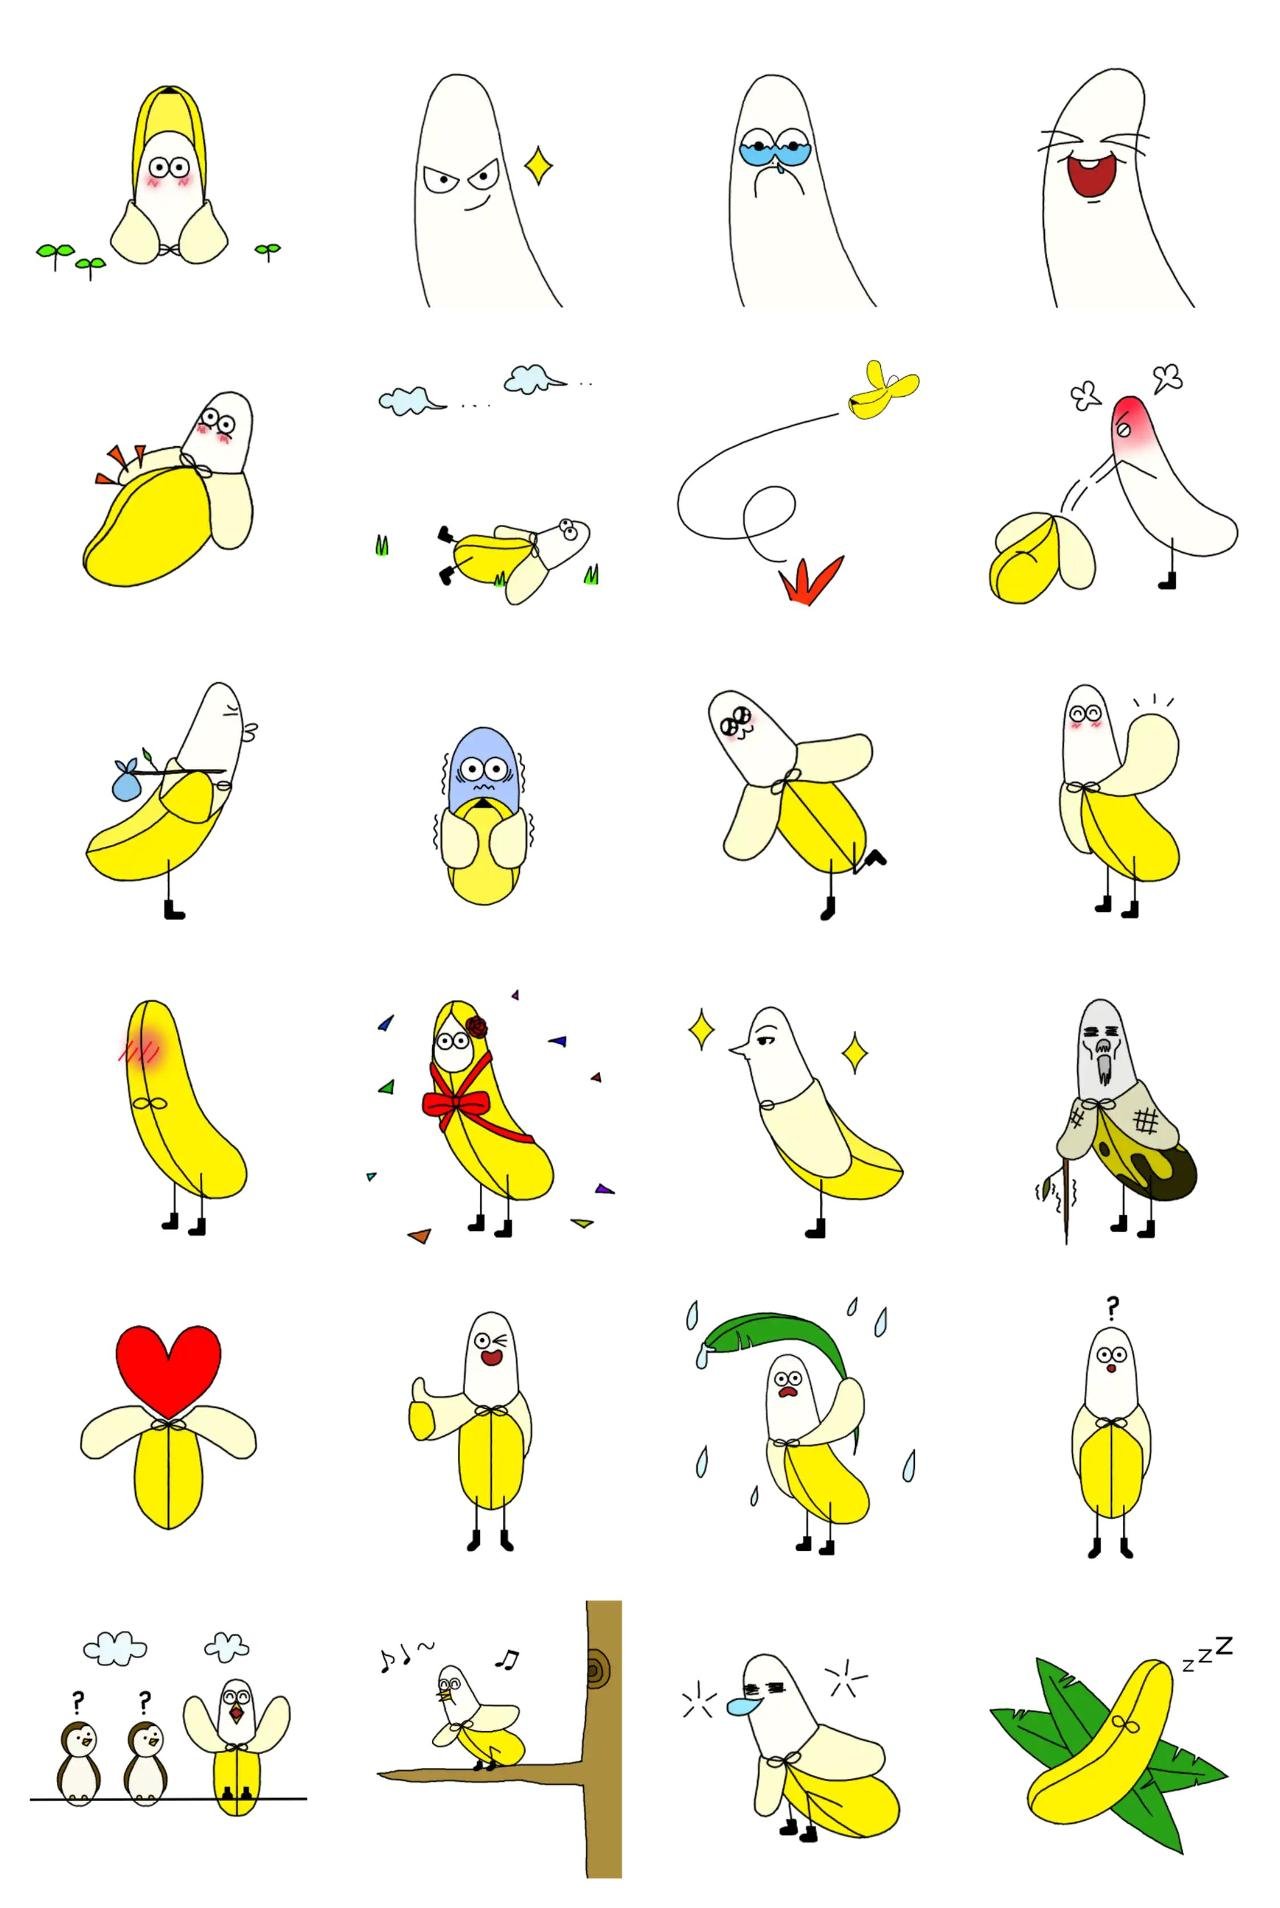 BARD is a flying banana Animals,Food/Drink sticker pack for Whatsapp, Telegram, Signal, and others chatting and message apps